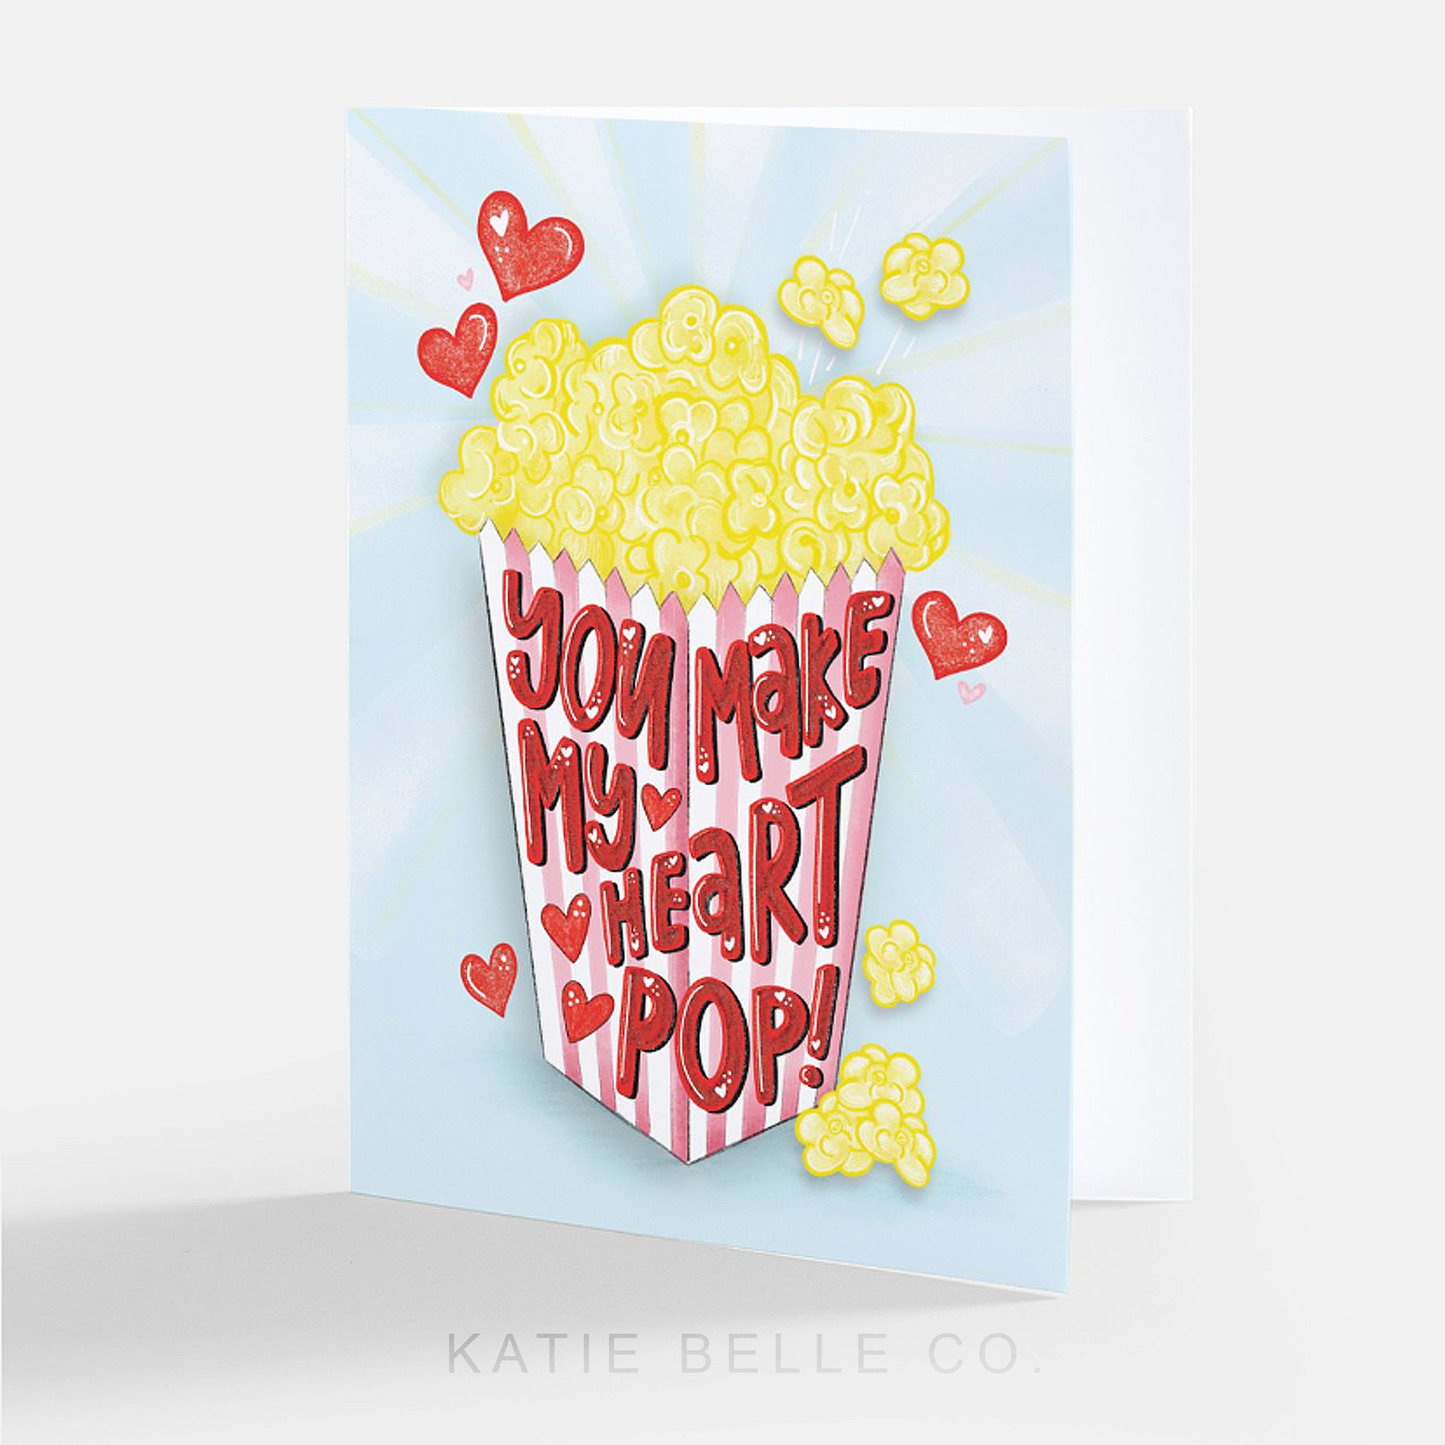 you make my heart pop. Popcorn card. greeting card. red floating hearts. popcorn bag. pink stripes. anniversary card. love greeting card. Valentine's day card. Popcorn lover gift. Katie Belle Co. 